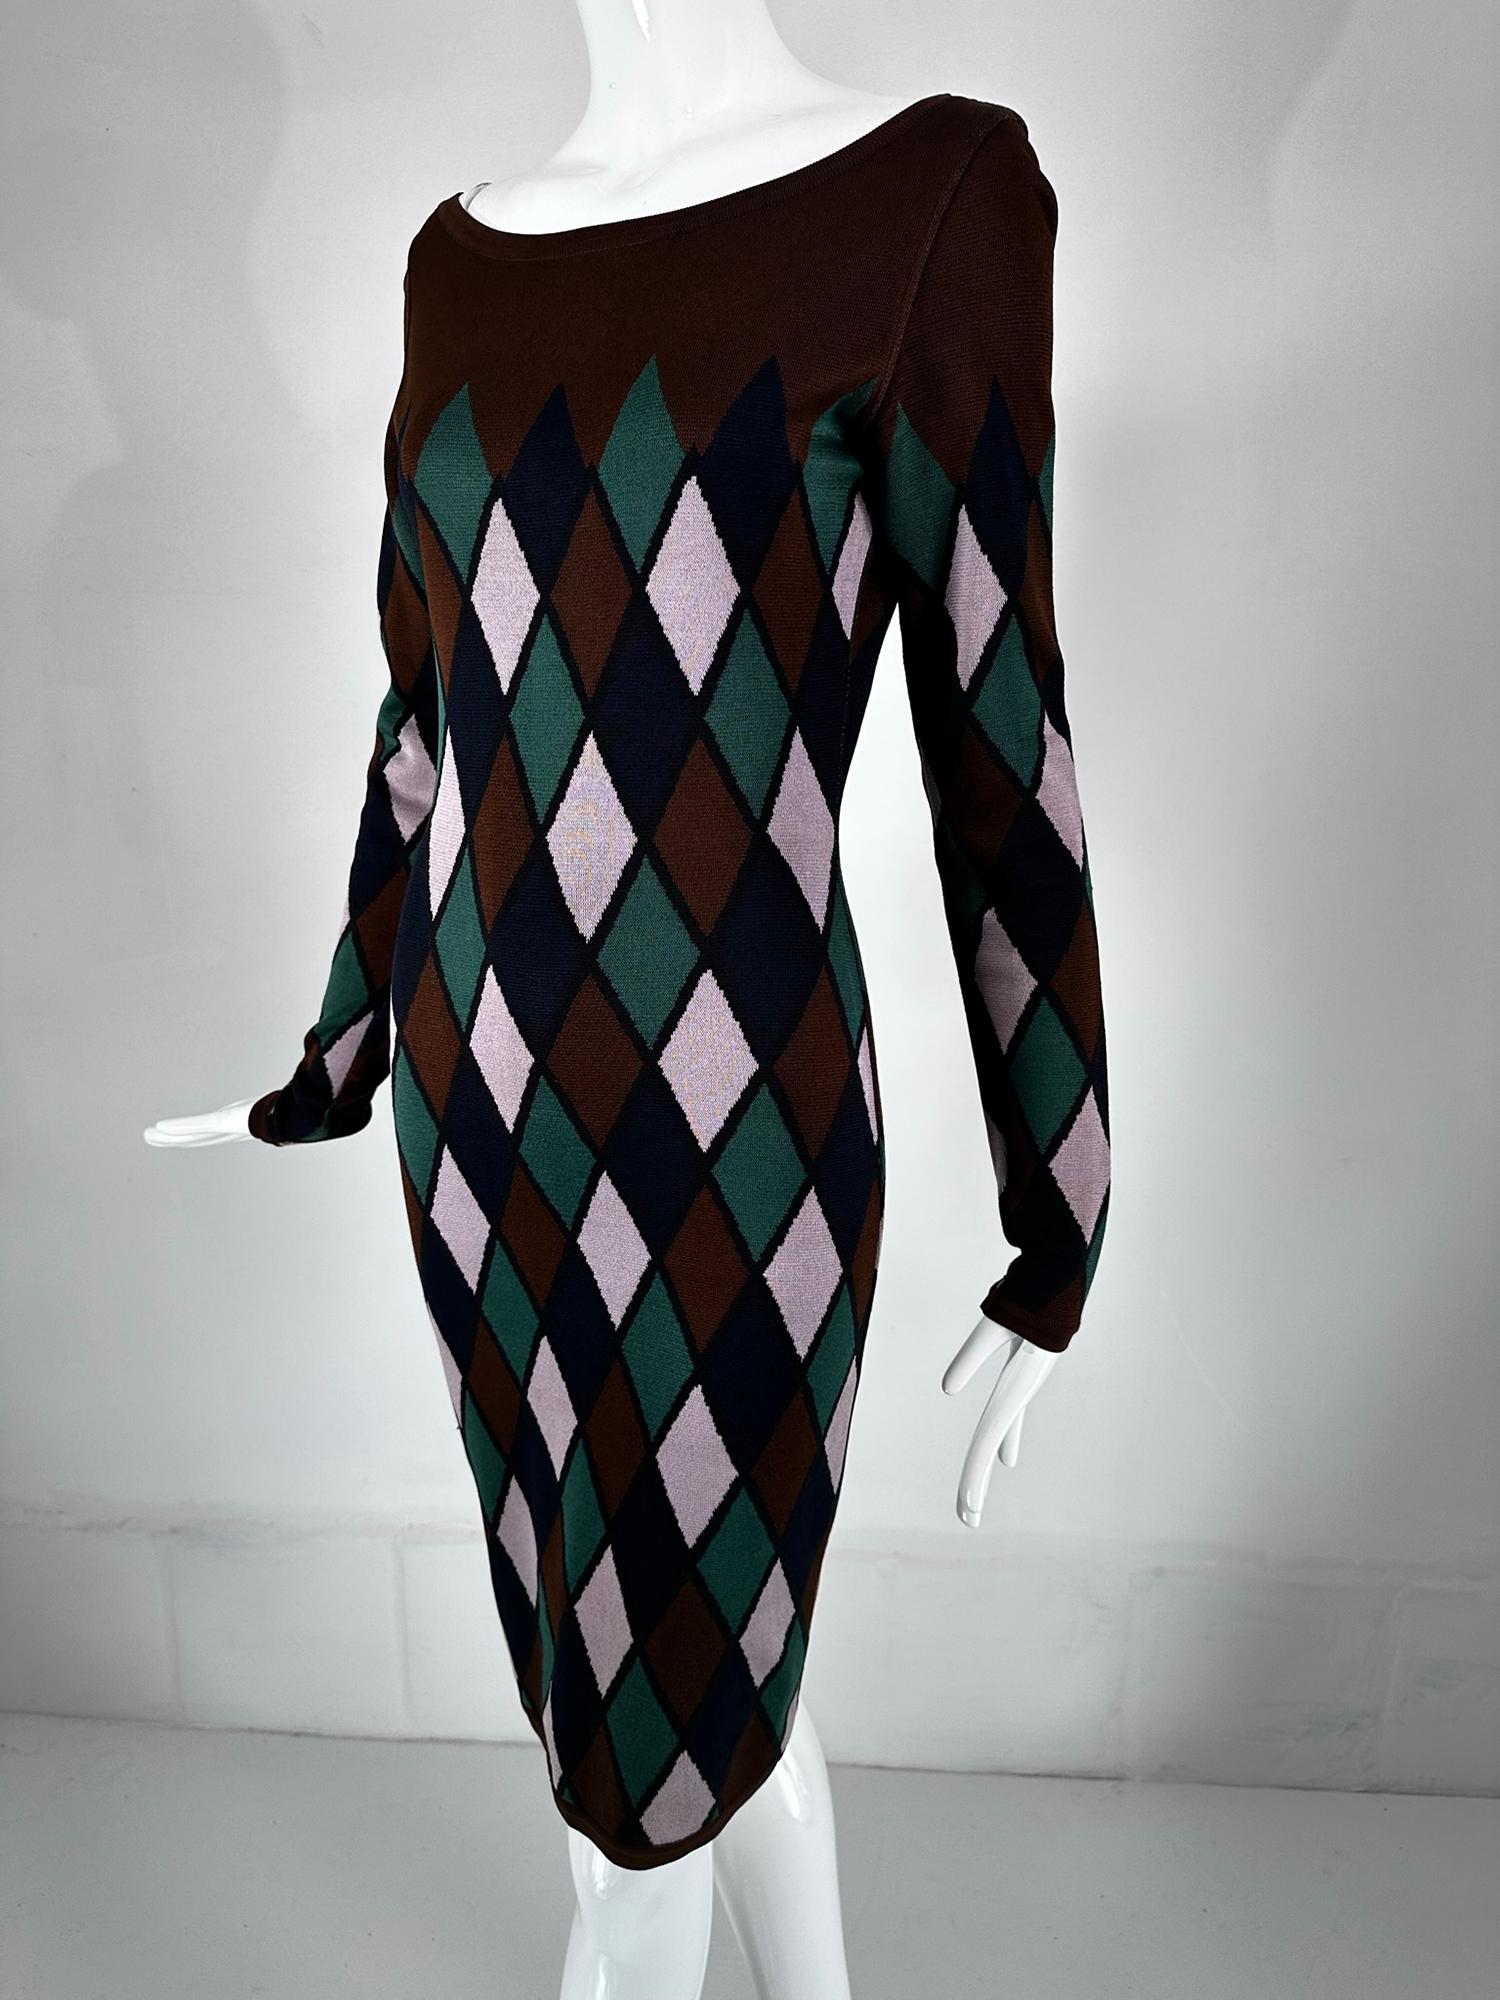 Azzedine Alaia rare Fall 1992 brown & green argyle knit body con dress marked size medium.  Silky rayon knit dress features a wide oval neckline with long tight sleeves. The body of the dress is tight tapering to the hem. The dress closes at the